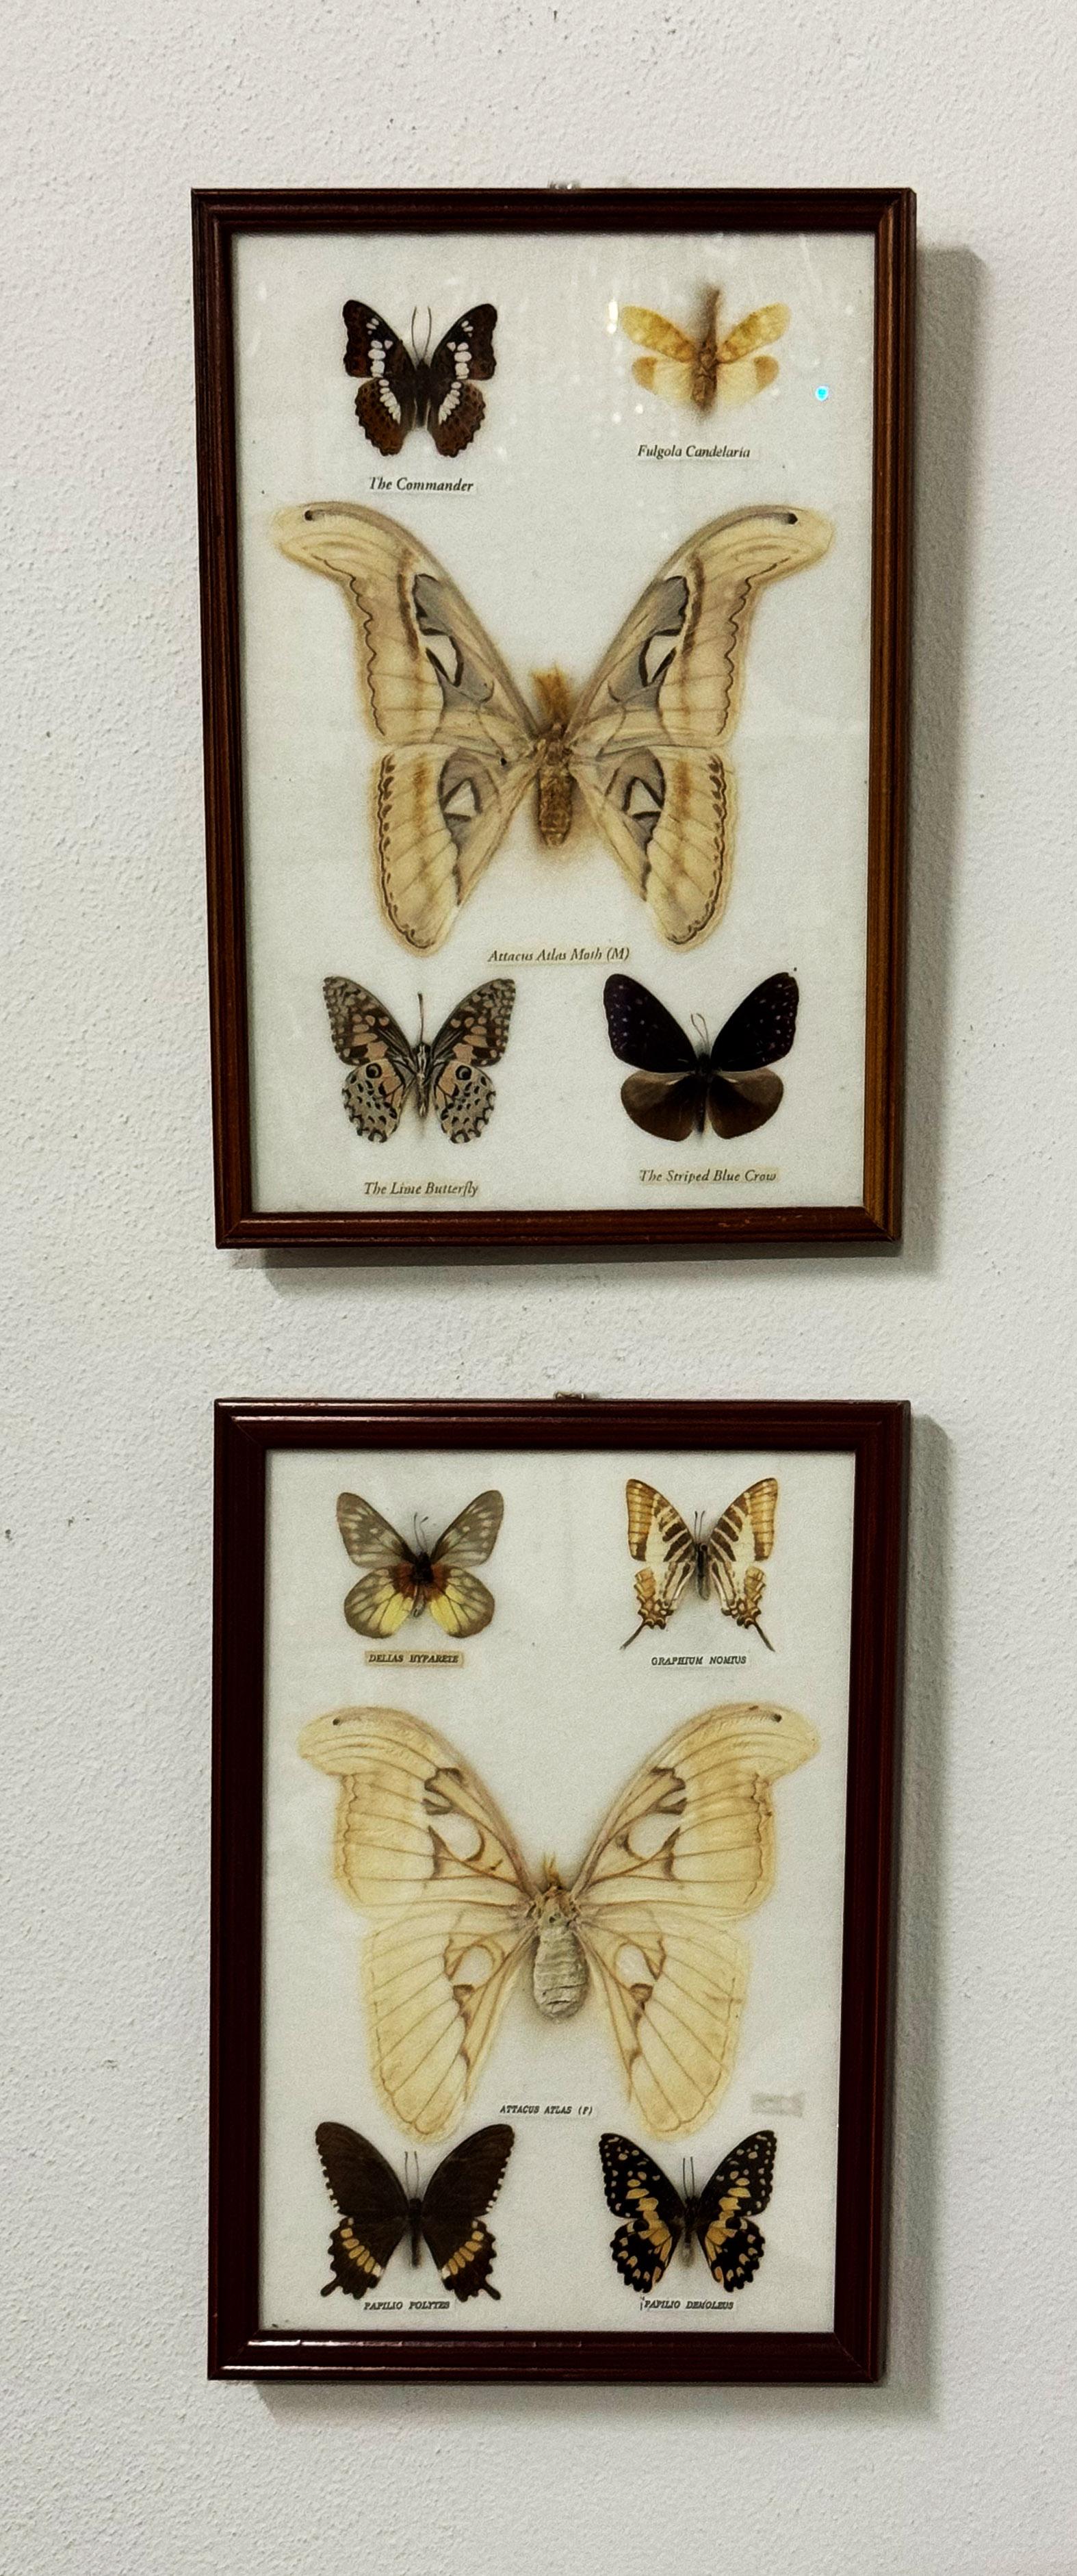 Framed butterfly collection featuring 10 butterflies with type of butterfly underneath each. Mounted in a shadowbox frame. Price for both.